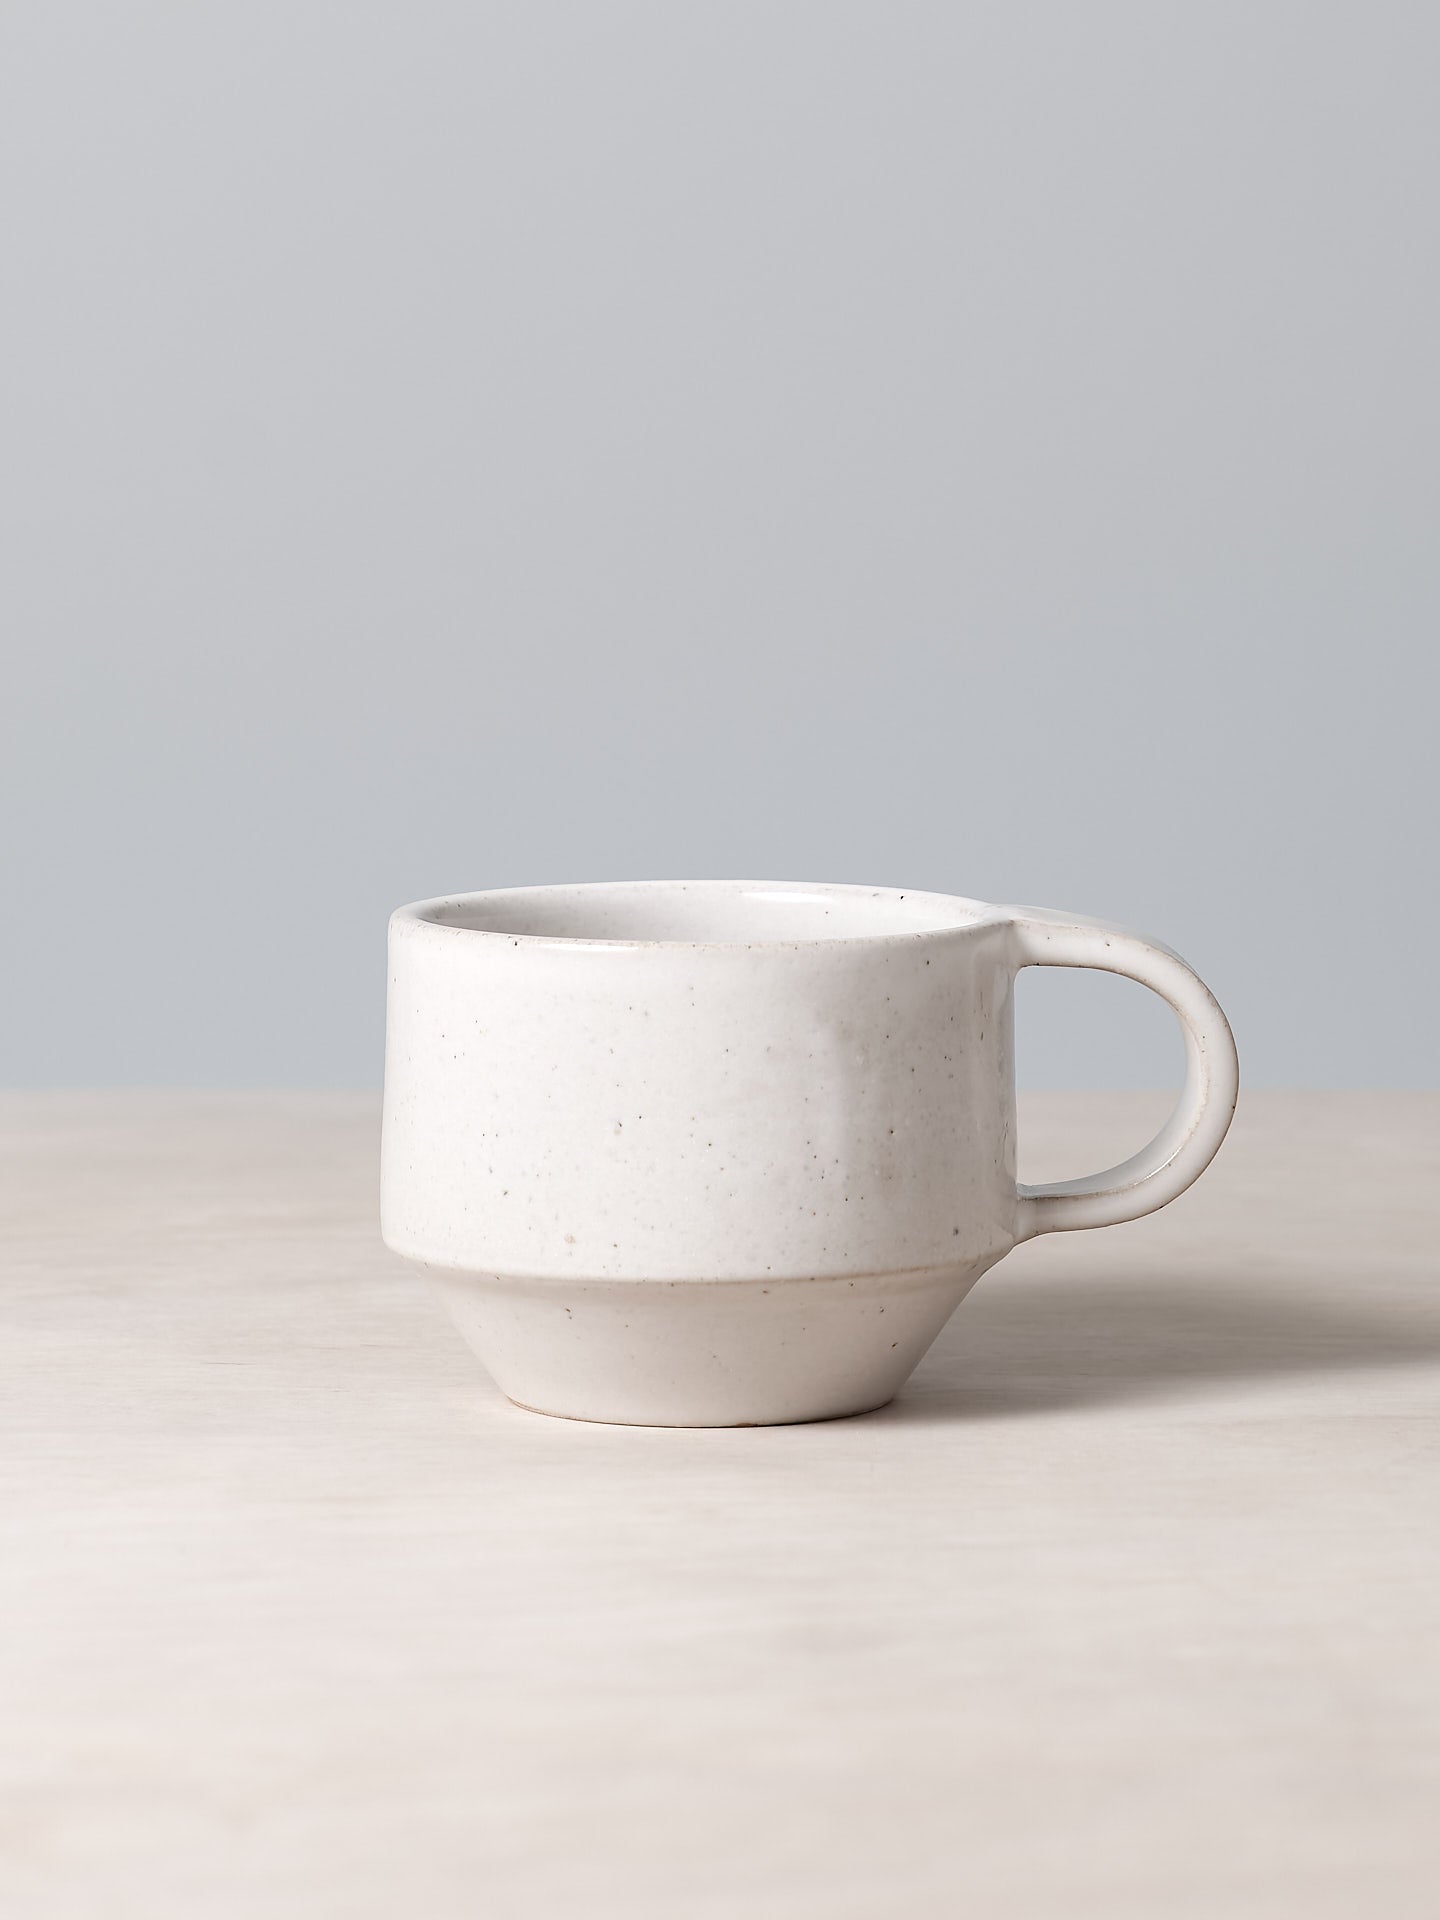 A C-handled Stacking Mug – White by Richard Beauchamp sitting on top of a table.